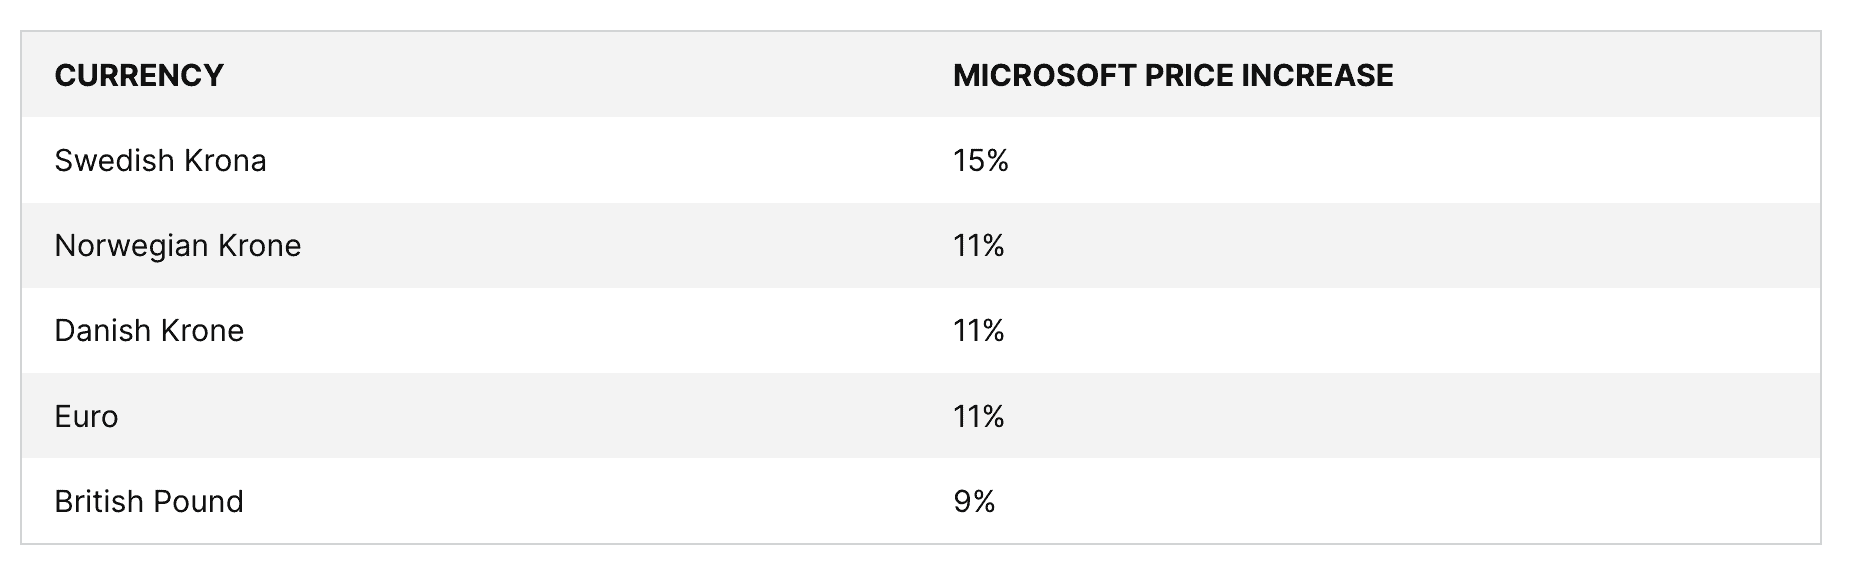 Offset Microsoft software price increases with US Cloud